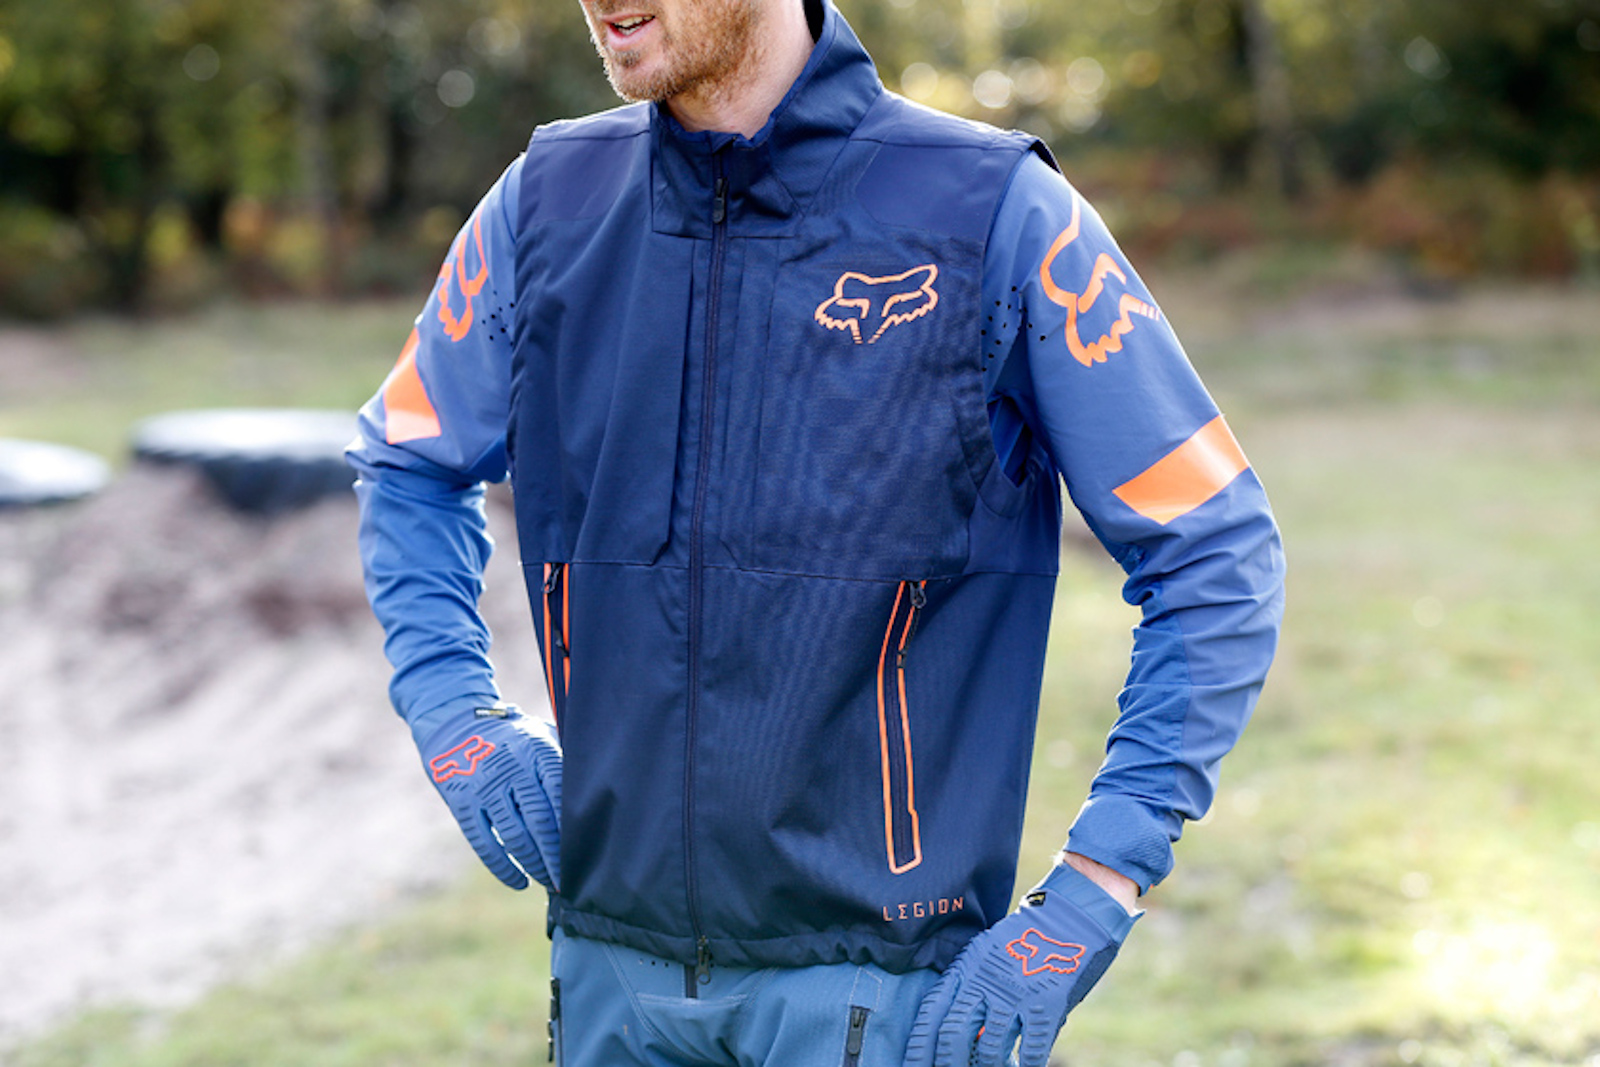 Tested - Fox Legion Off-road Jacket and Vest